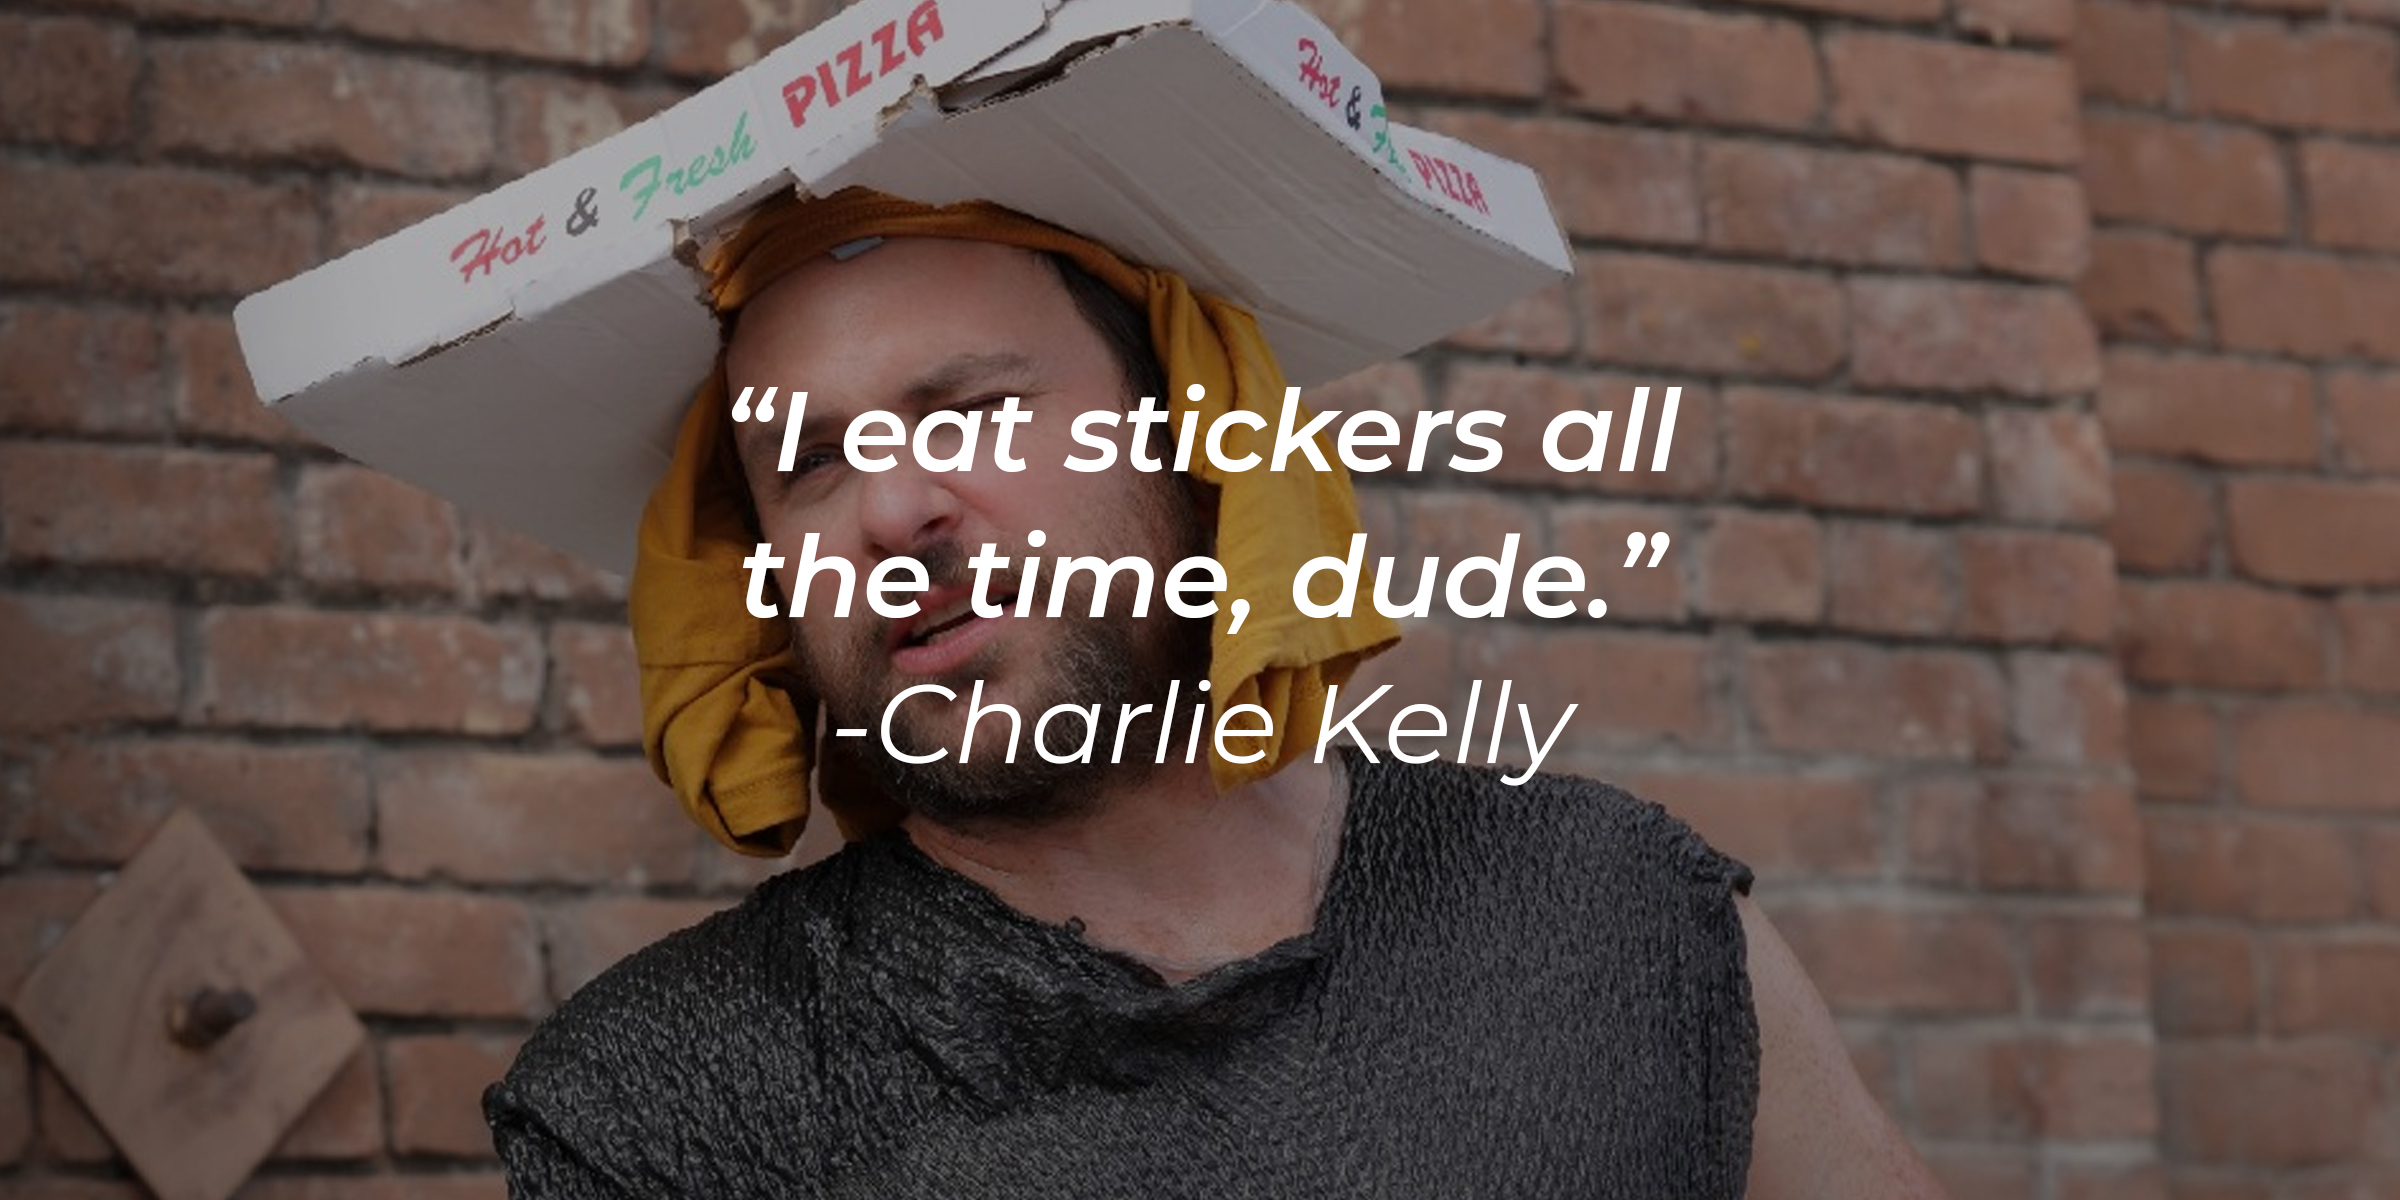 Charlie Kelly with his quote: "I eat stickers all the time, dude." | Source: Facebook/alwayssunny